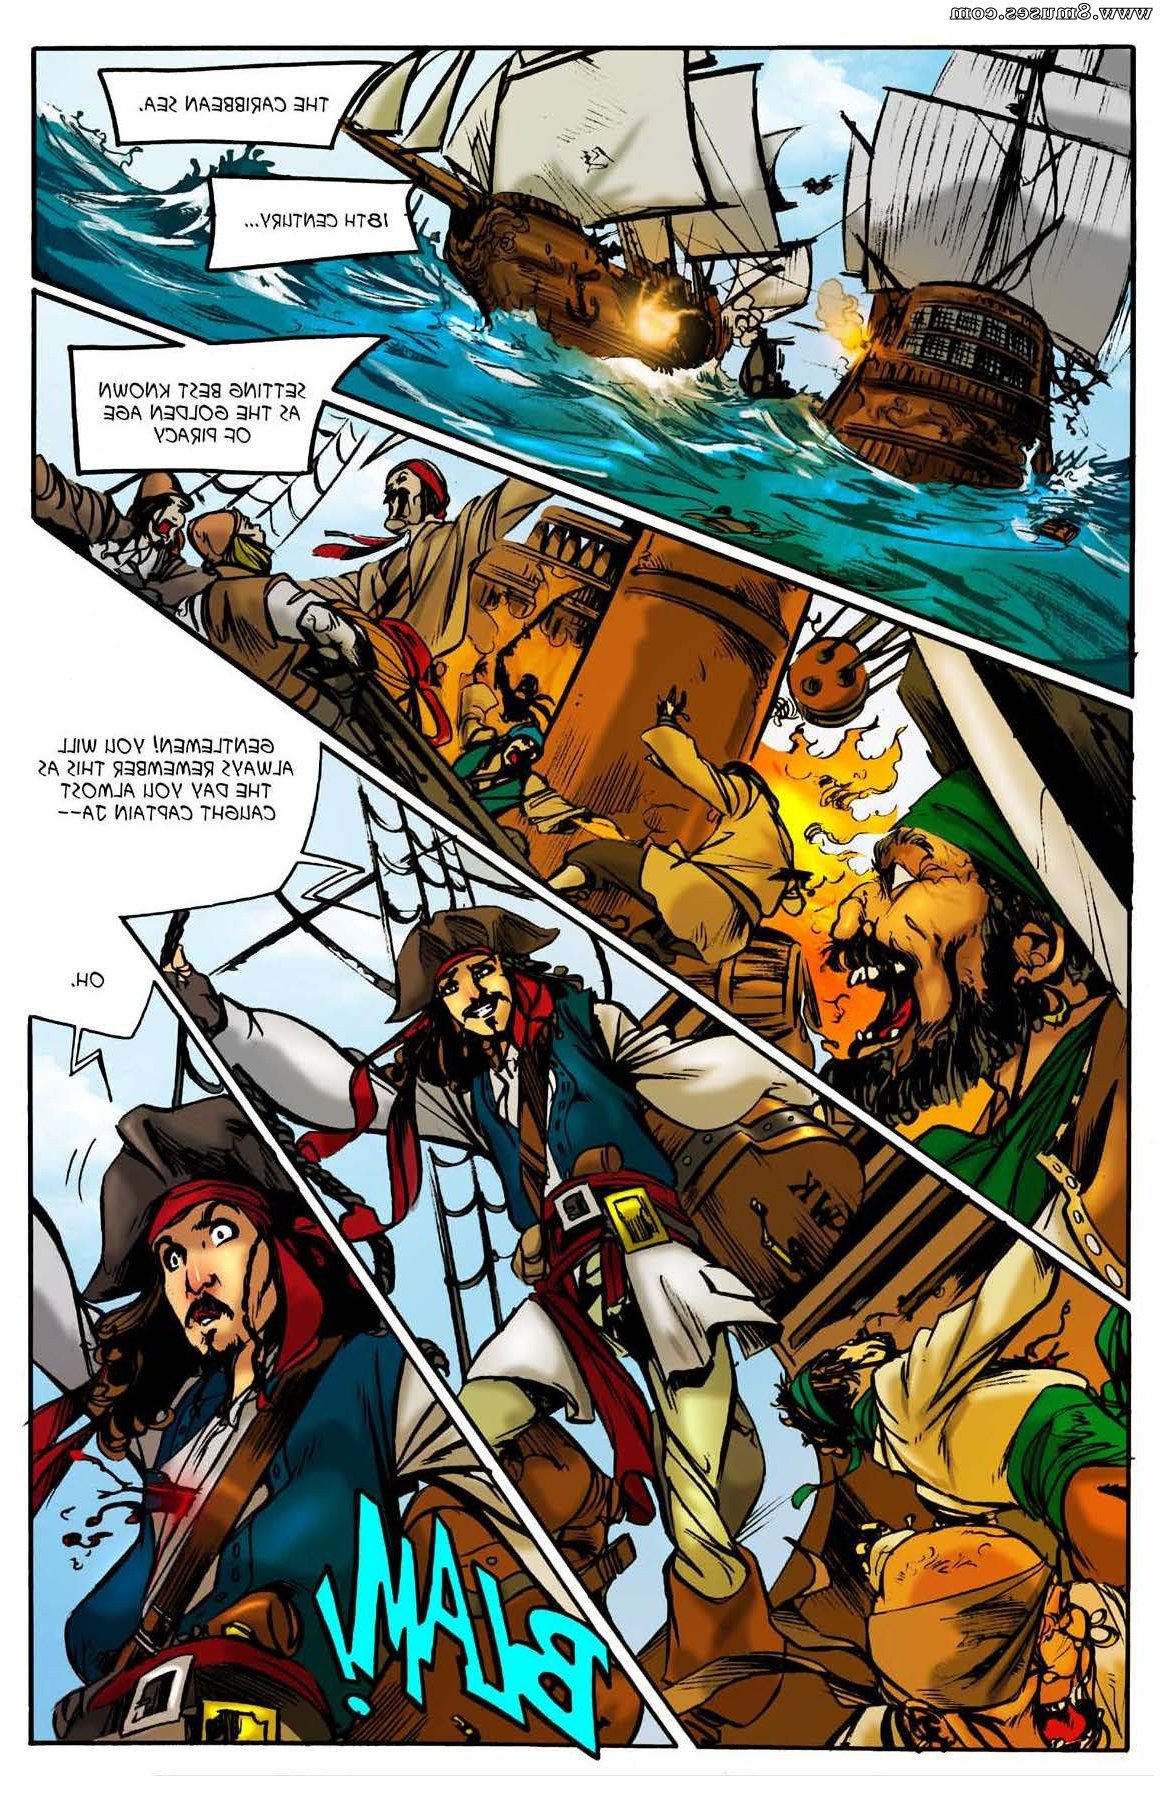 BE-Story-Club-Comics/A-Pirates-Life/Issue-1 A_Pirates_Life_-_Issue_1_3.jpg